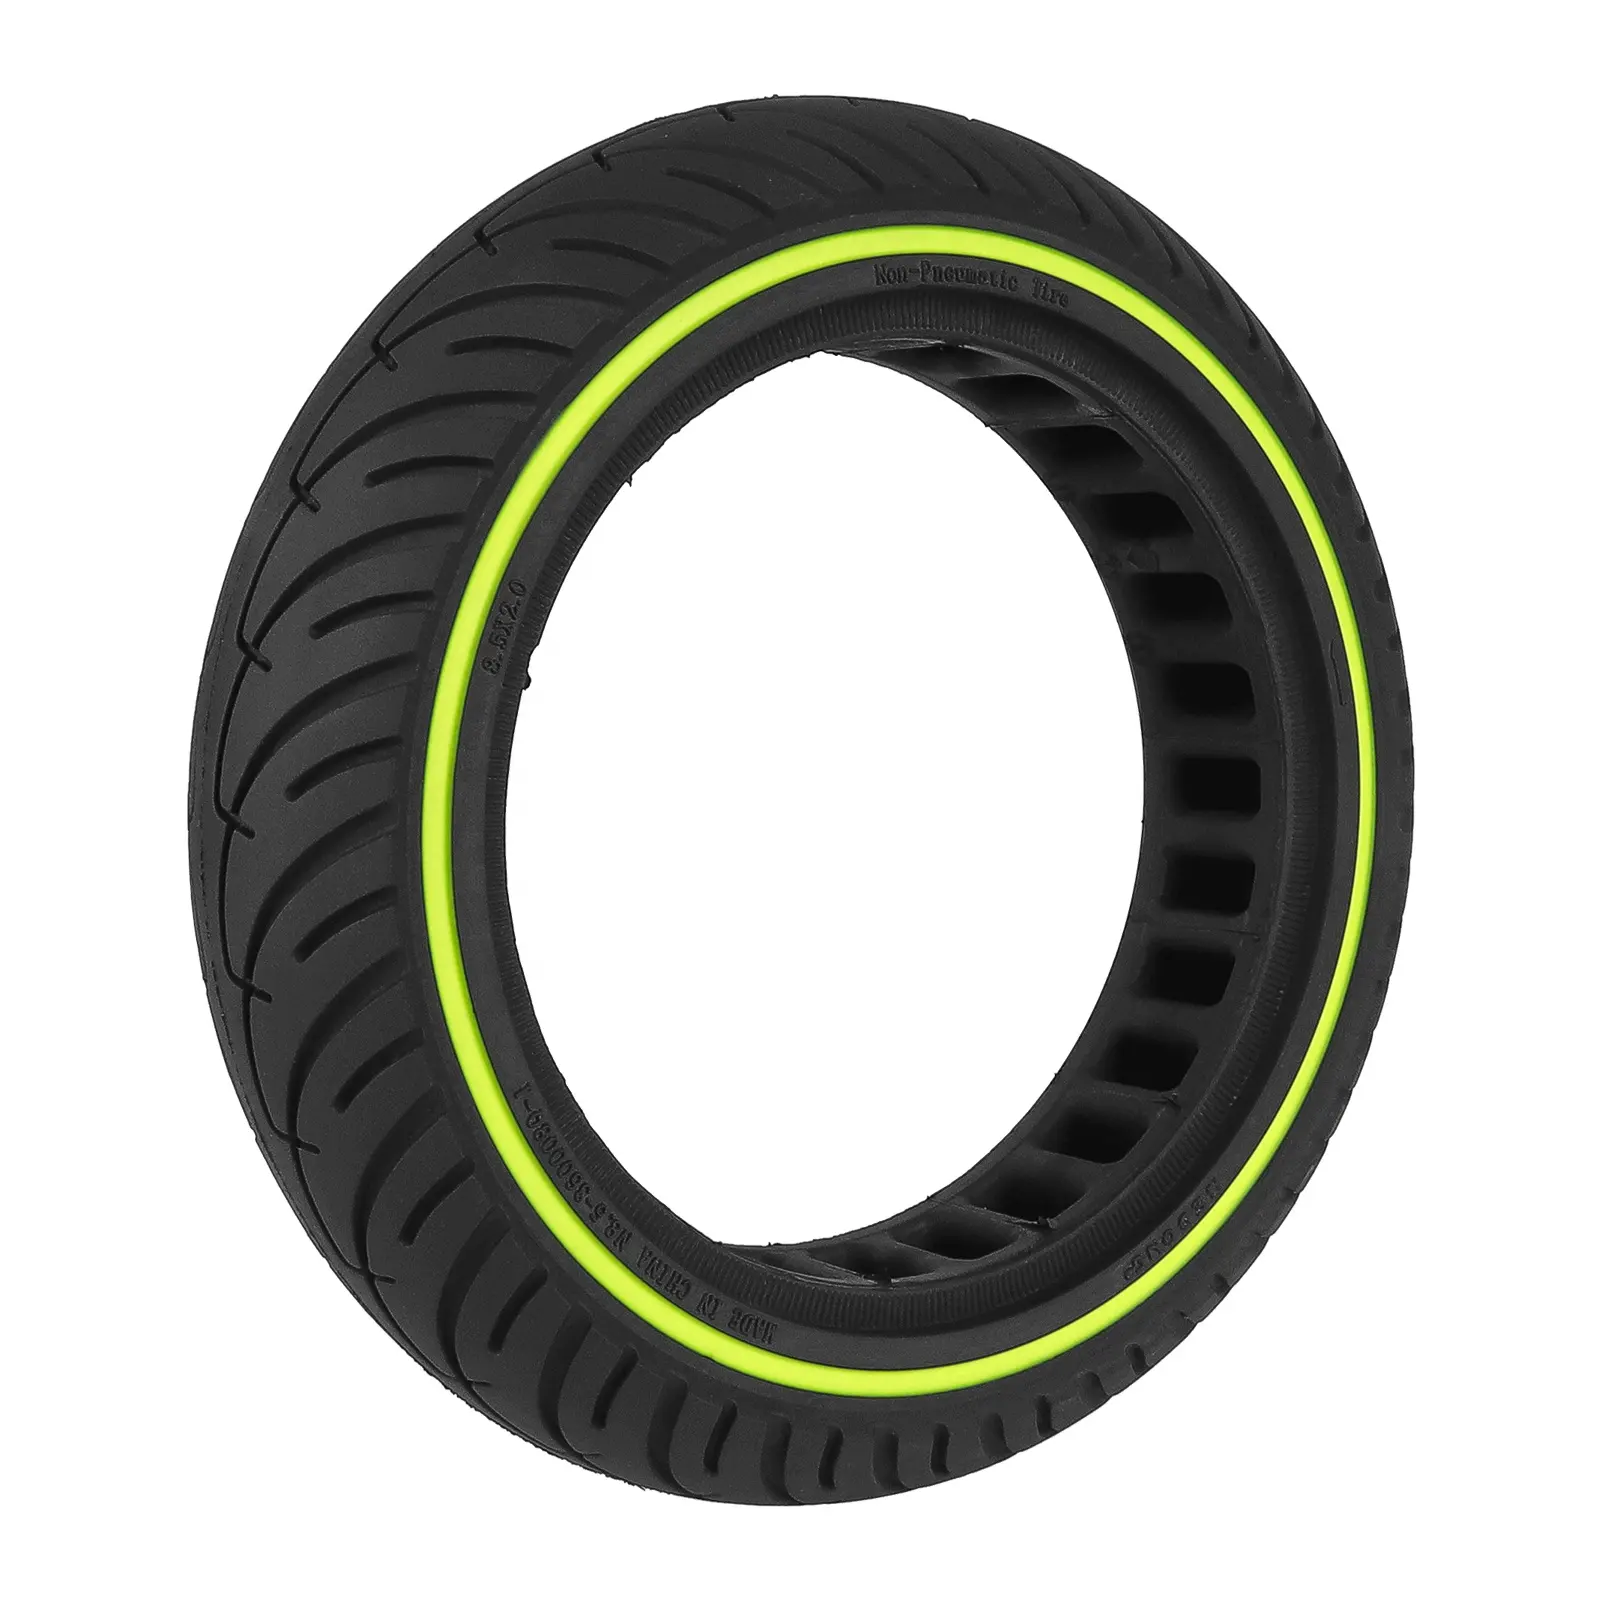 8.5 inch Solid Tire With Fluorescent Green Circle for Xiaomi M365 Pro 1s Electric Scooter 8.5x2.0 Line Honeycomb Airless Tyre